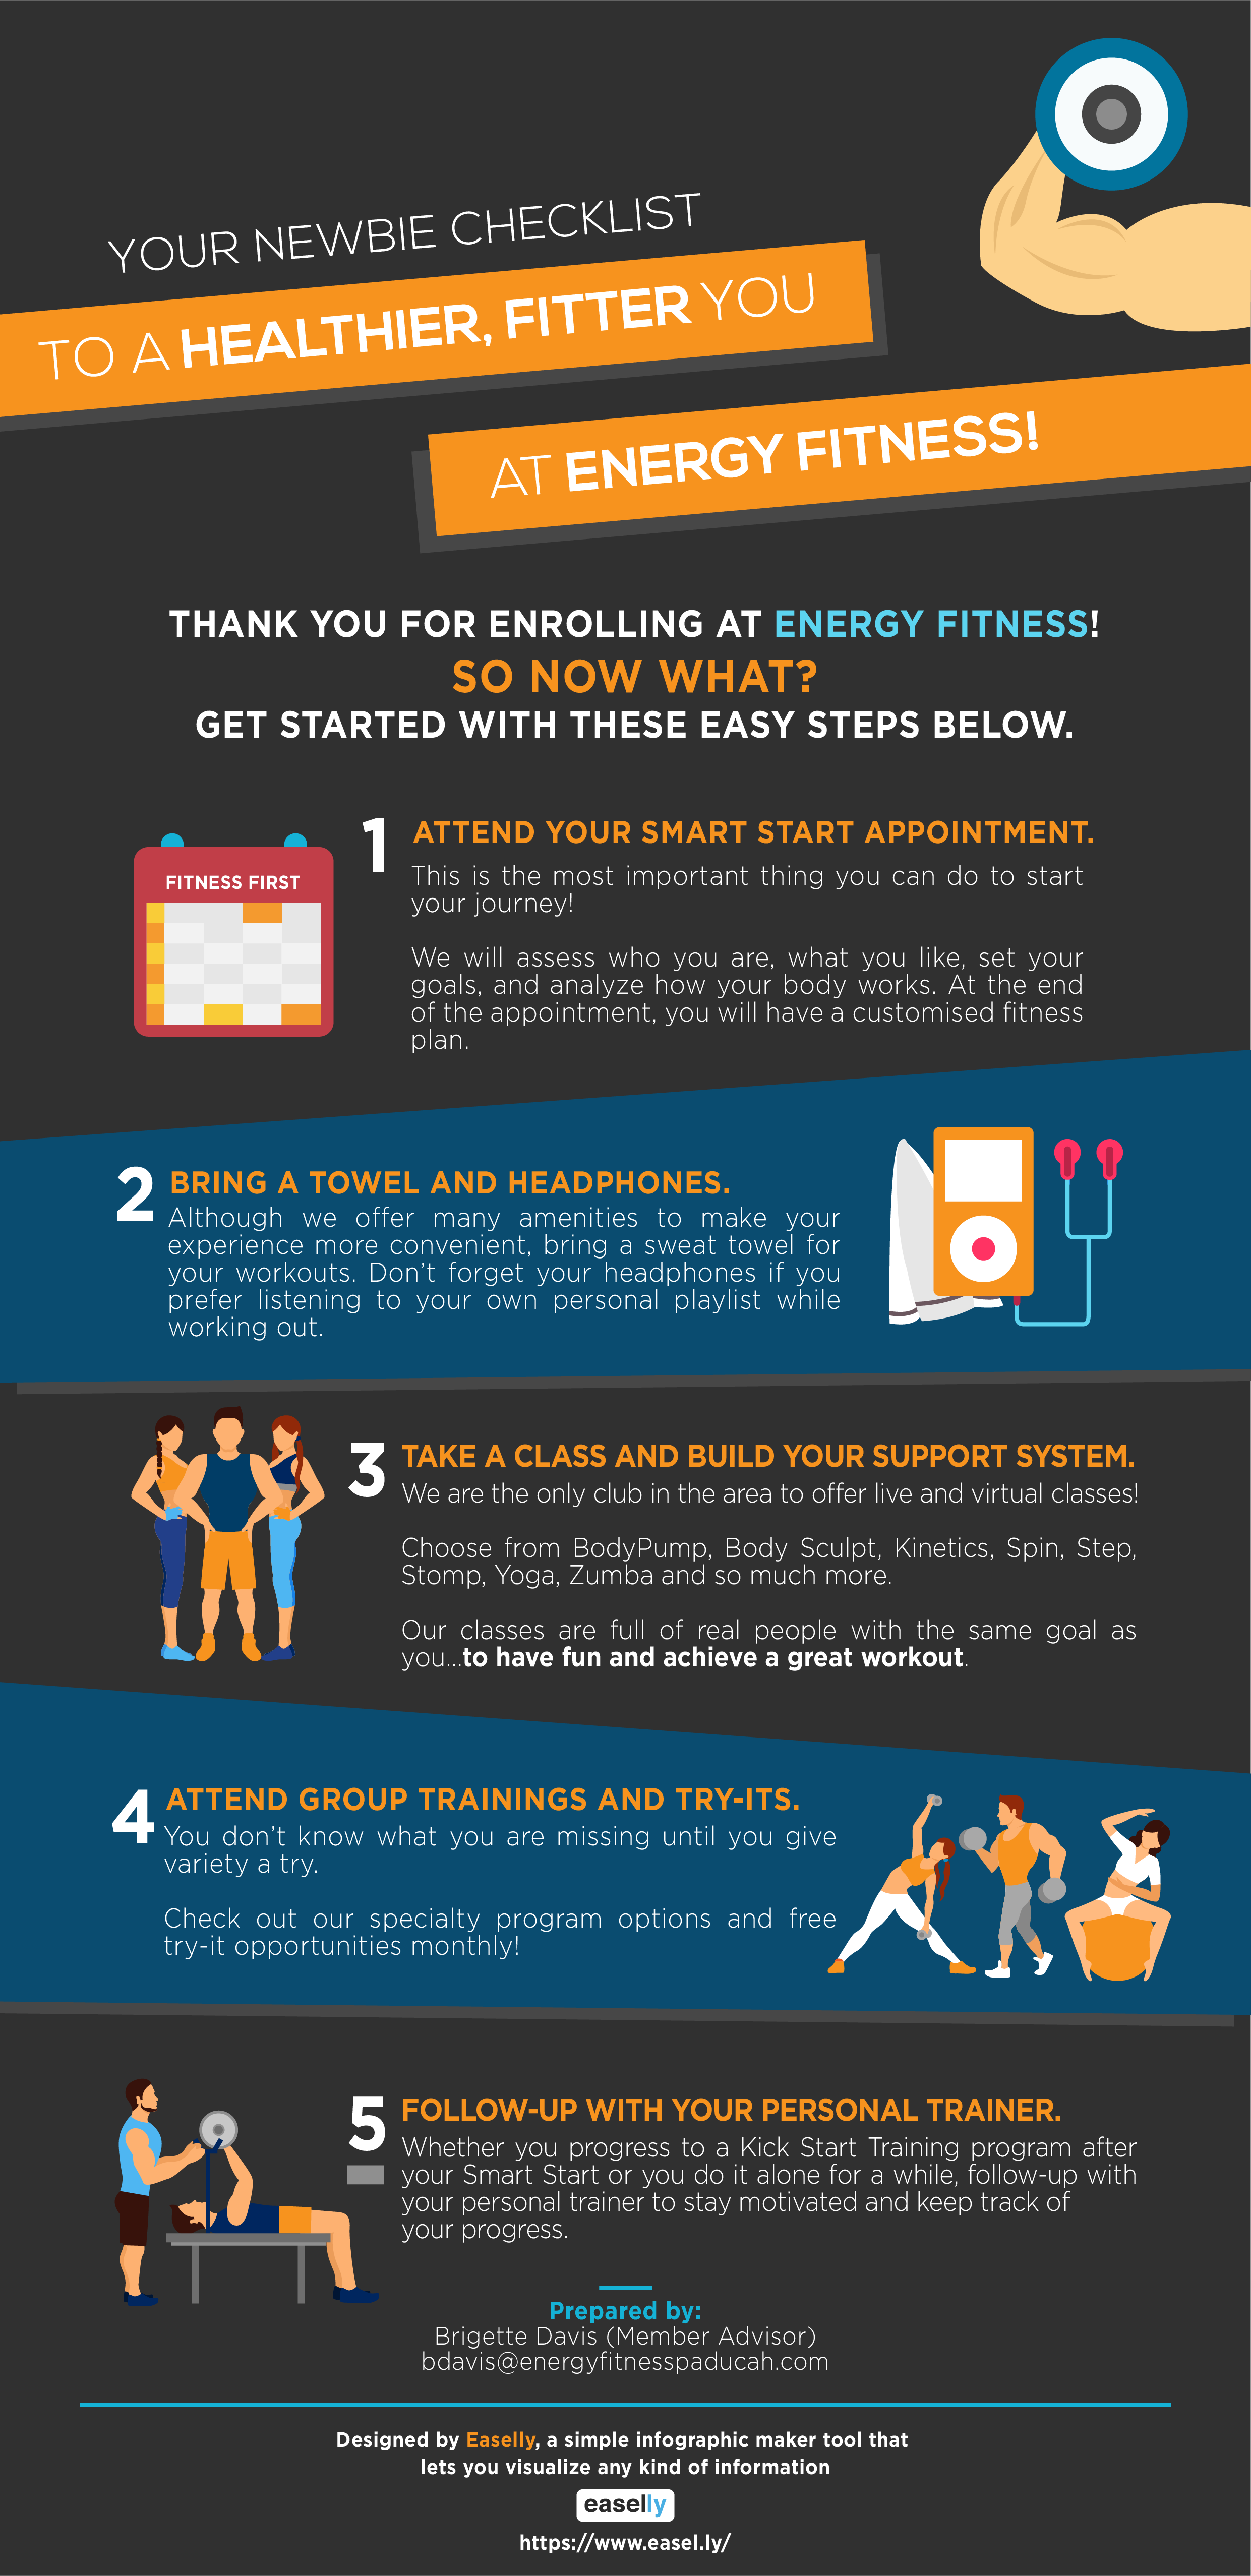 Onboarding Infographic Example: Your Newbie Checklist to a Healthier, Fitter You at Energy Fitness